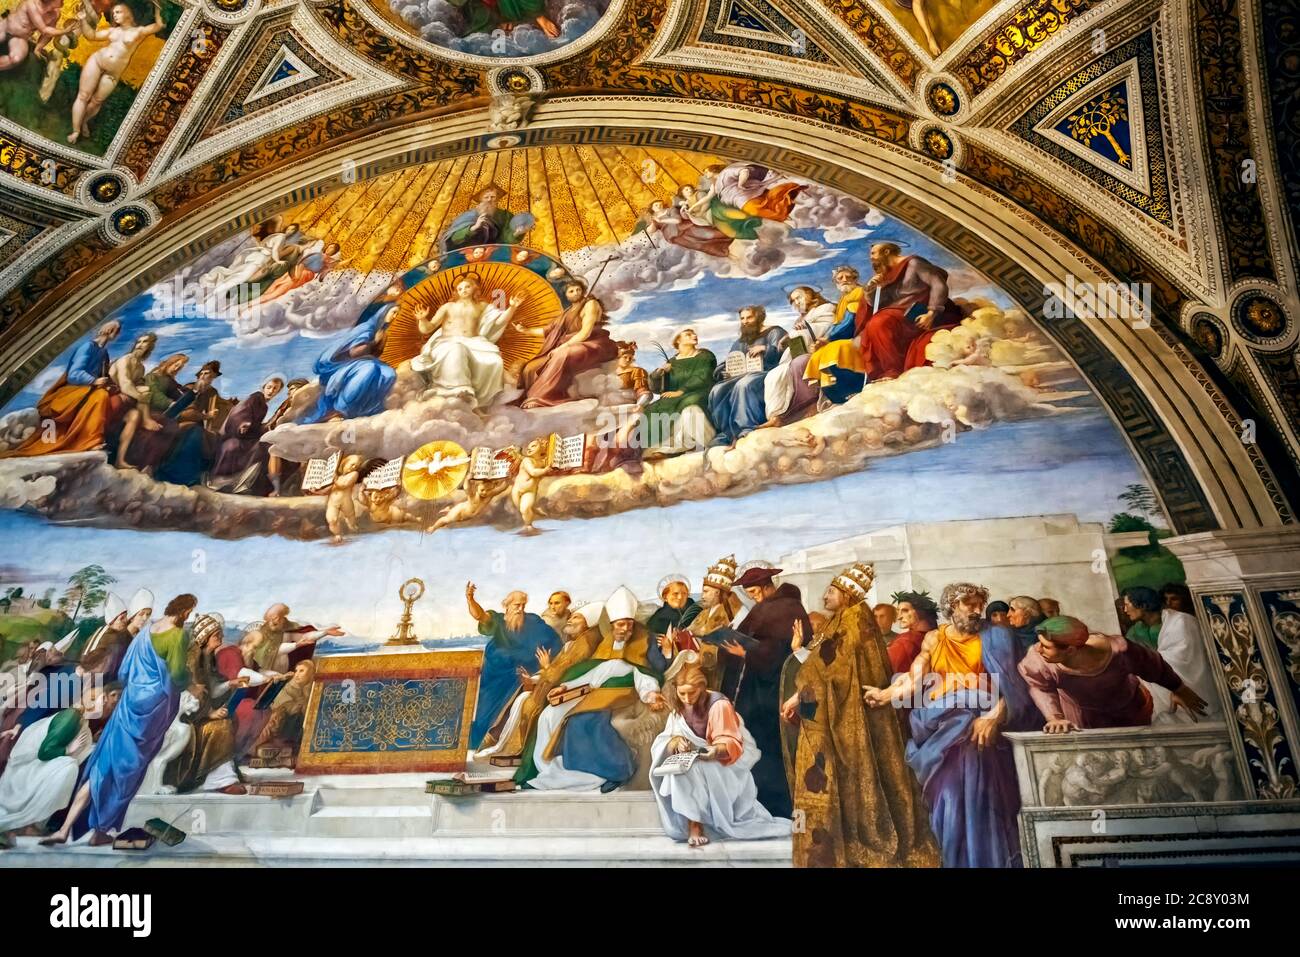 Vatican - September 22, 2014: Luxury painting details of interior Hall of the immaculate conception ( Sala dell'immacolata Concezione ) at Apostolic P Stock Photo